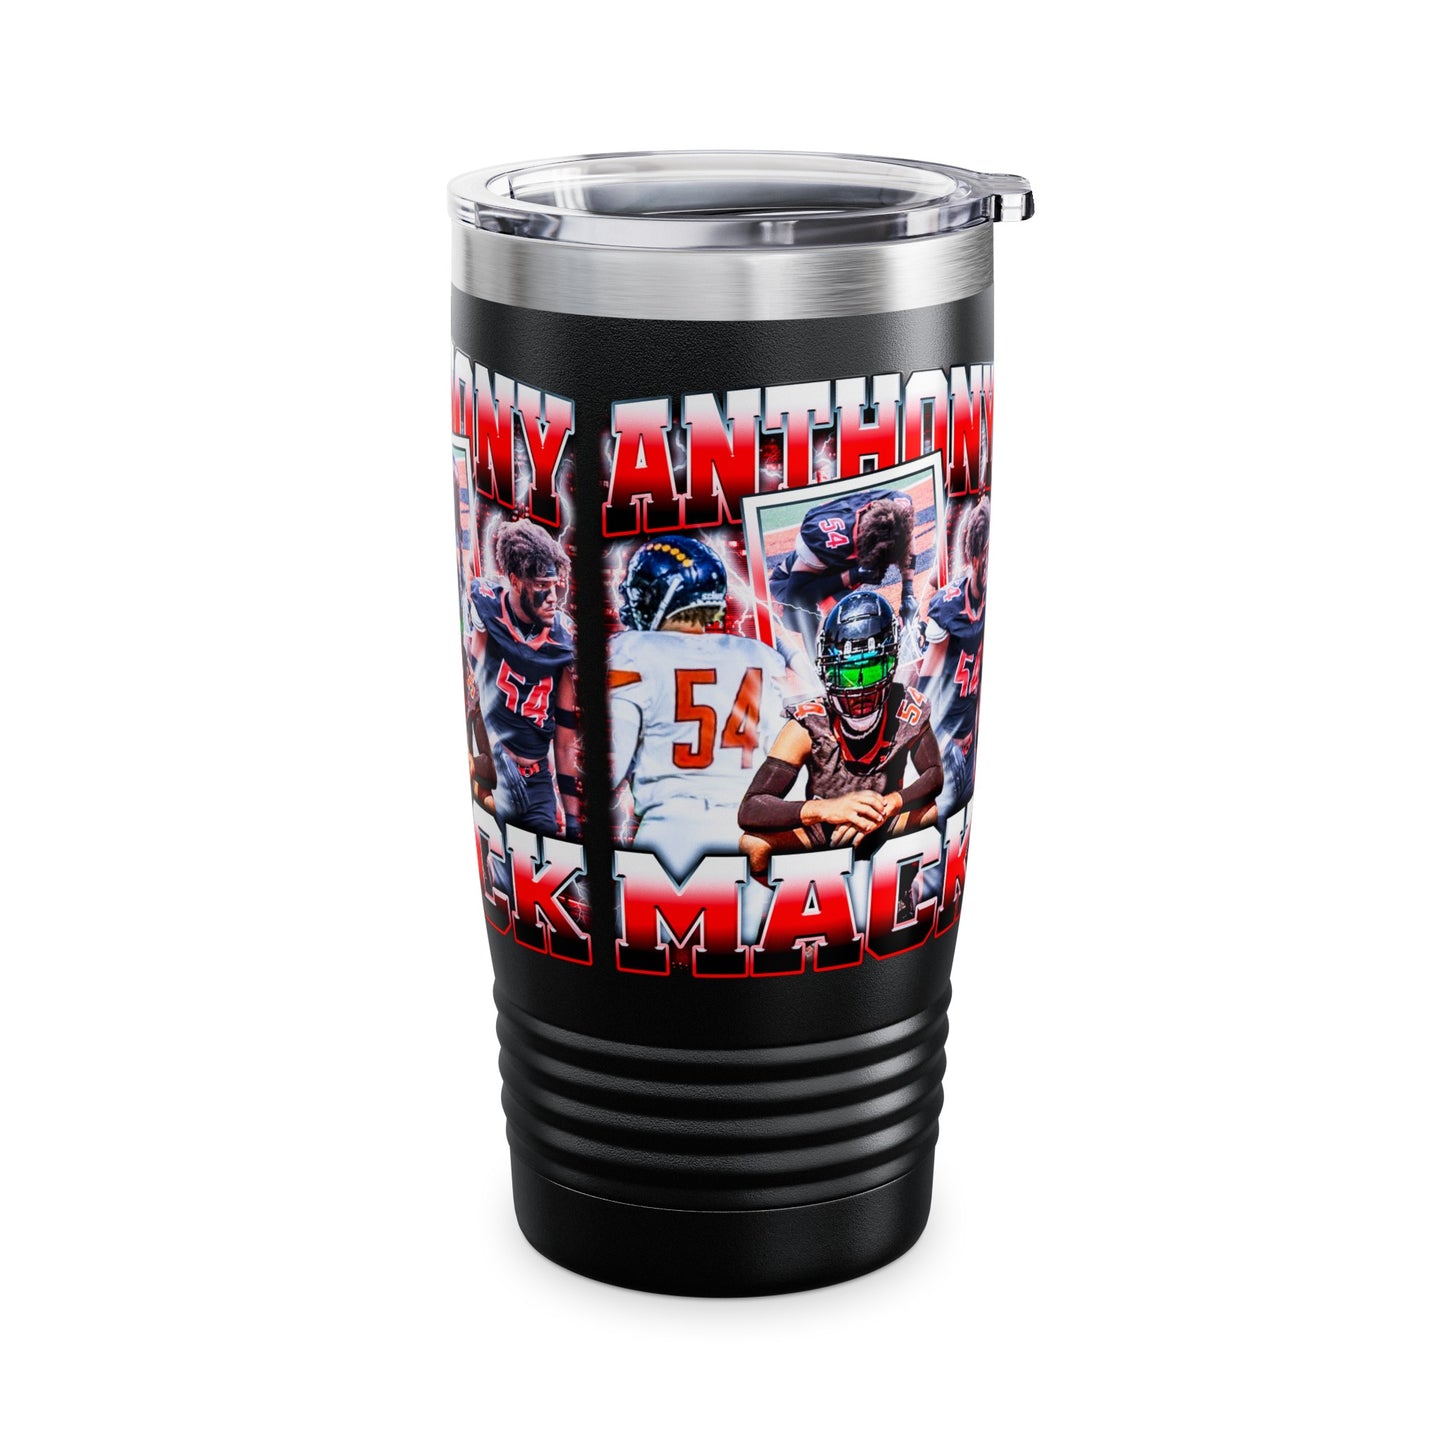 Anthony Mack Stainless Steal Tumbler